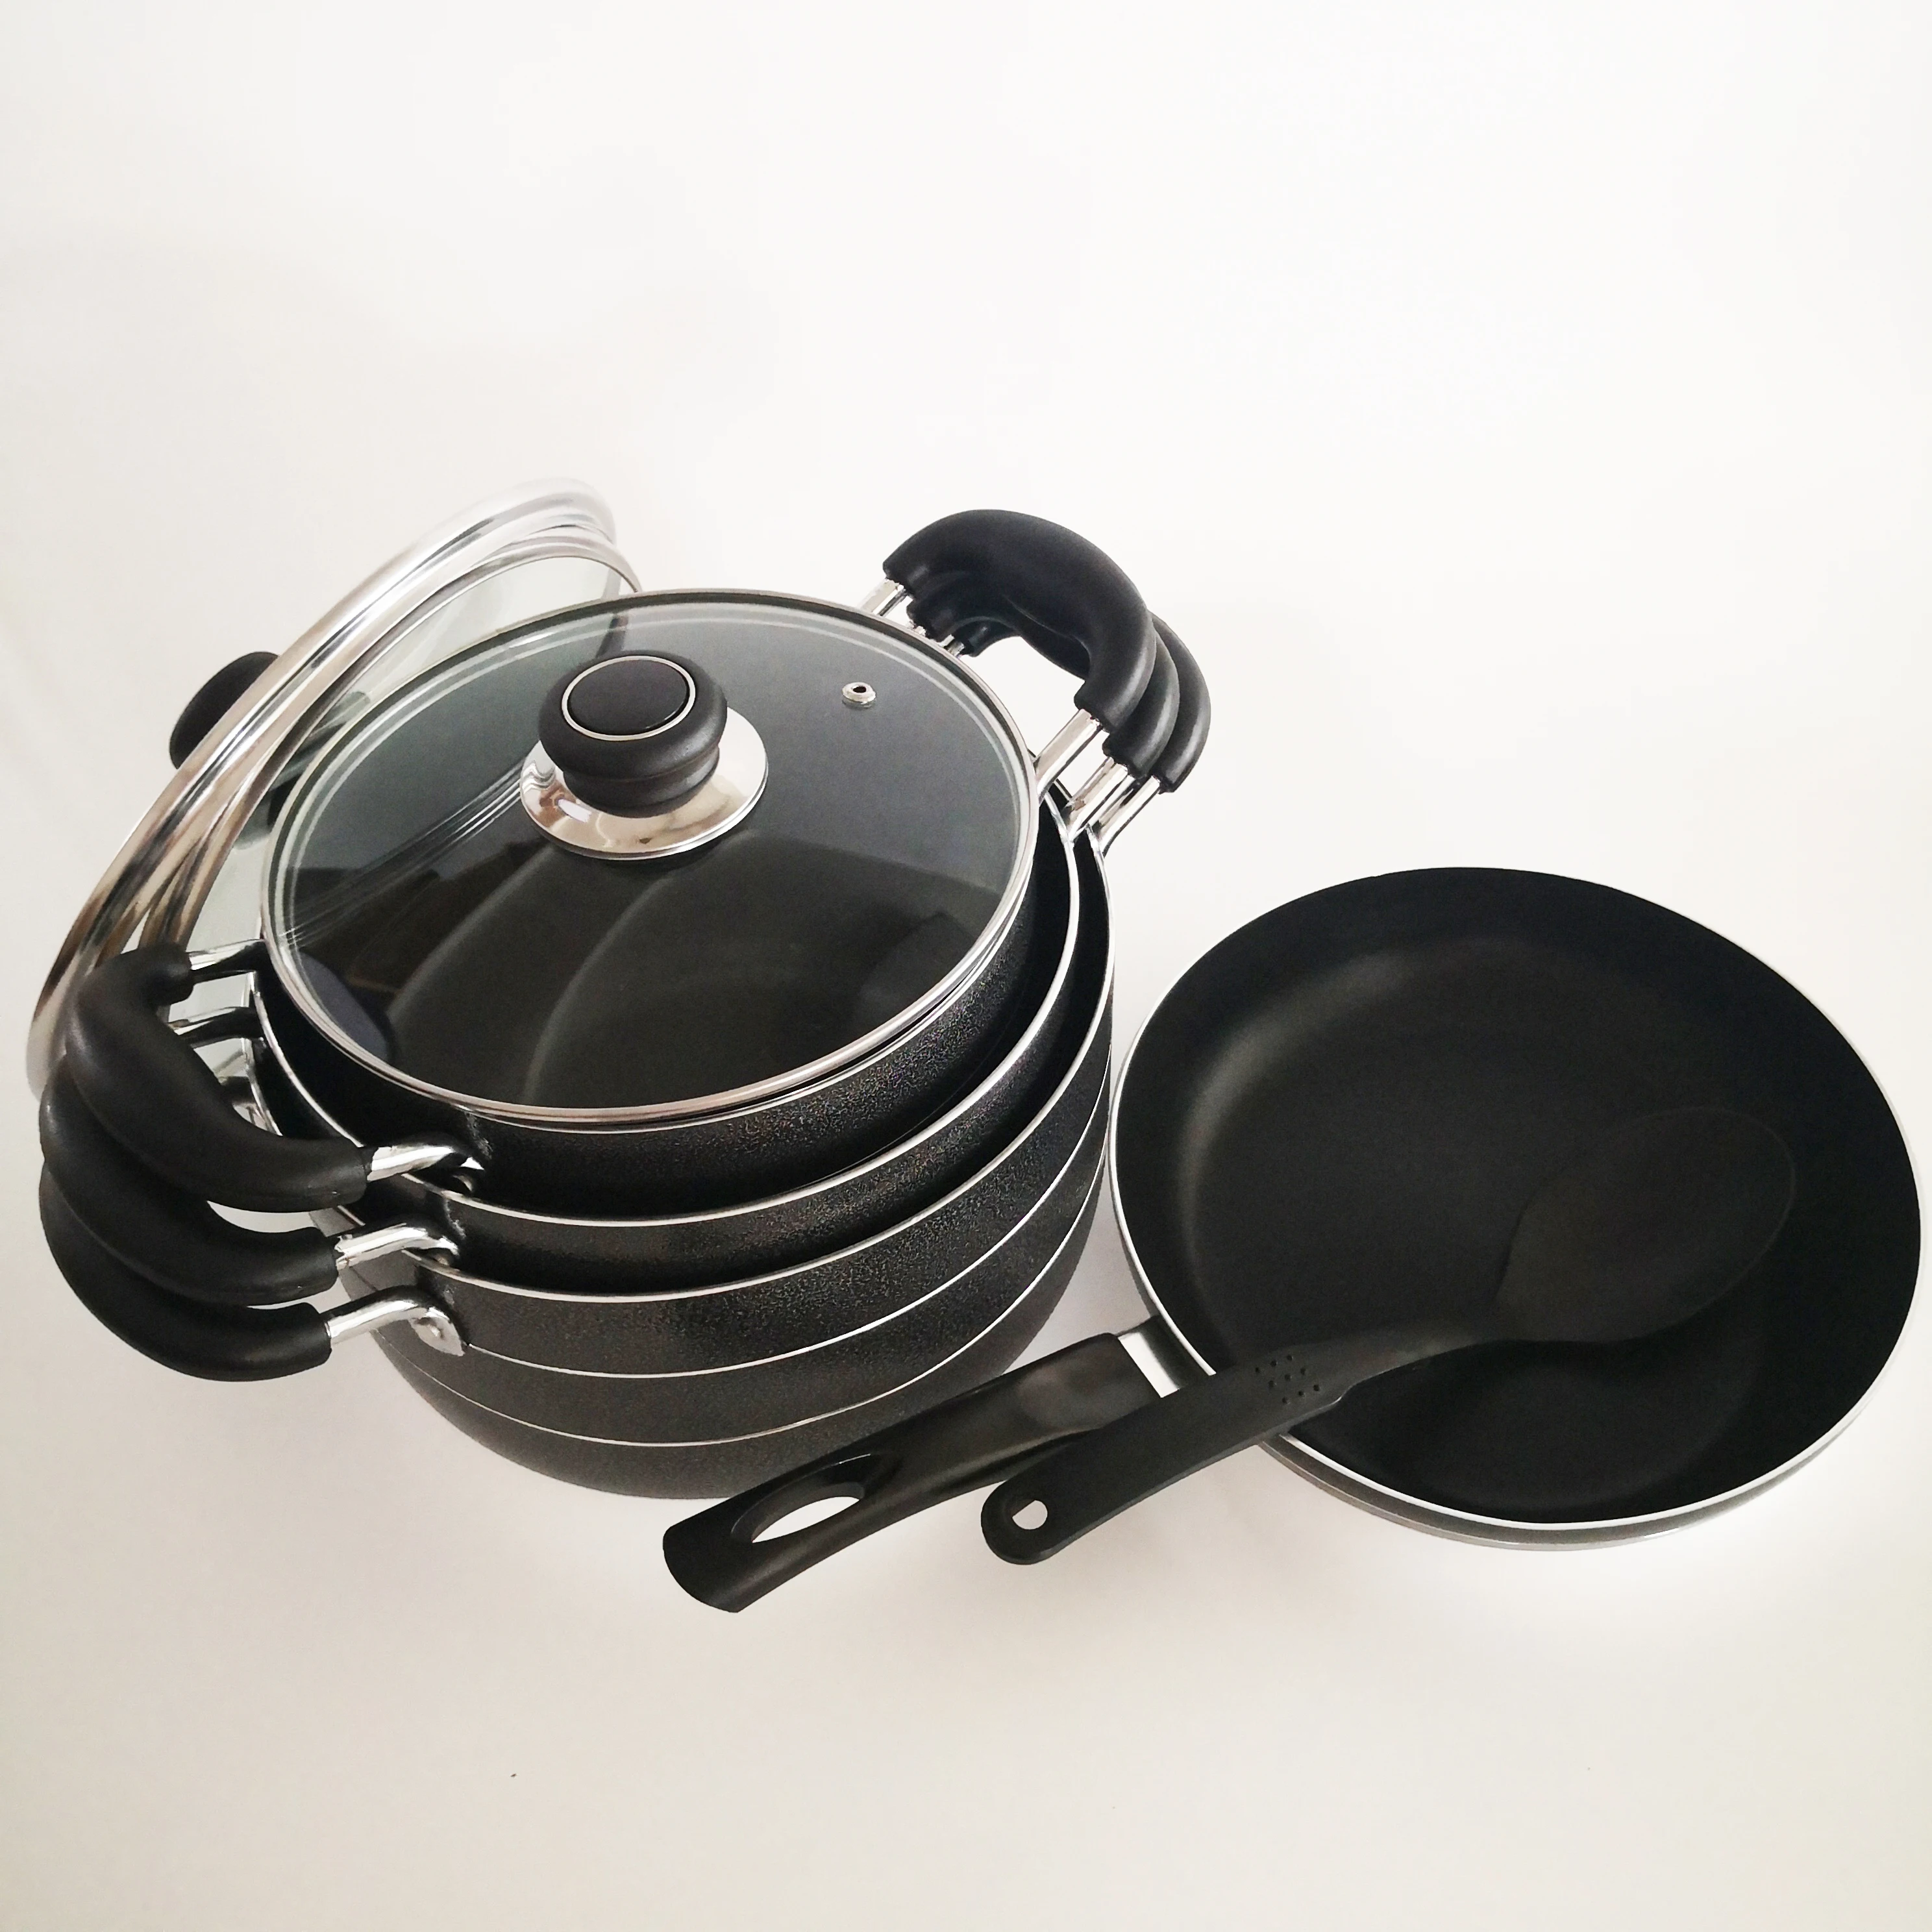 

Black Coated Cooking Pot Non-Stick Aluminum Kitchen Pots Hot In African Market, Polishing